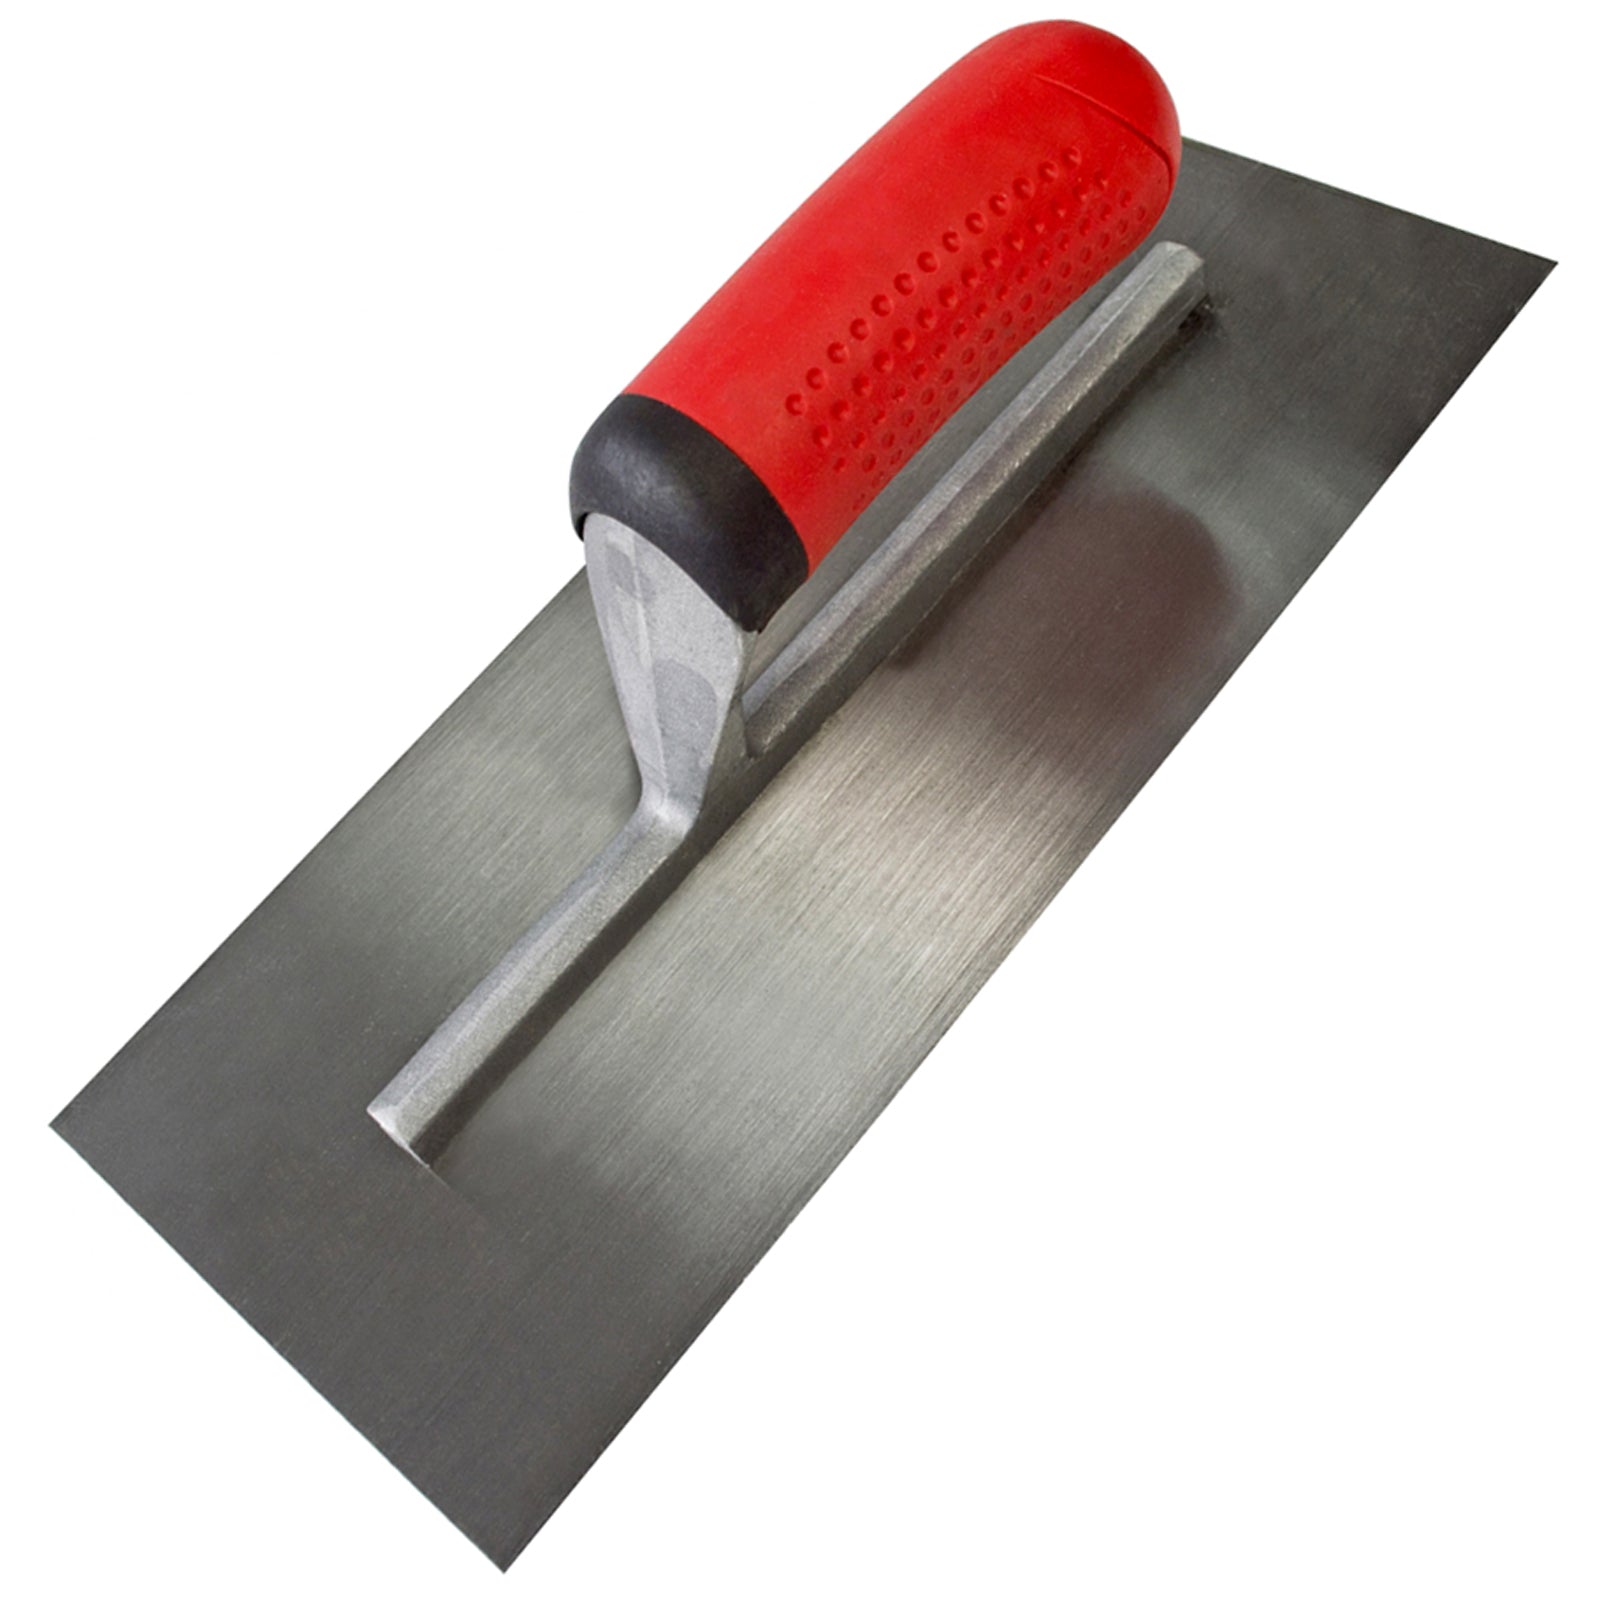 Amtech 275mm (11") Plastering Trowel with Soft Grip